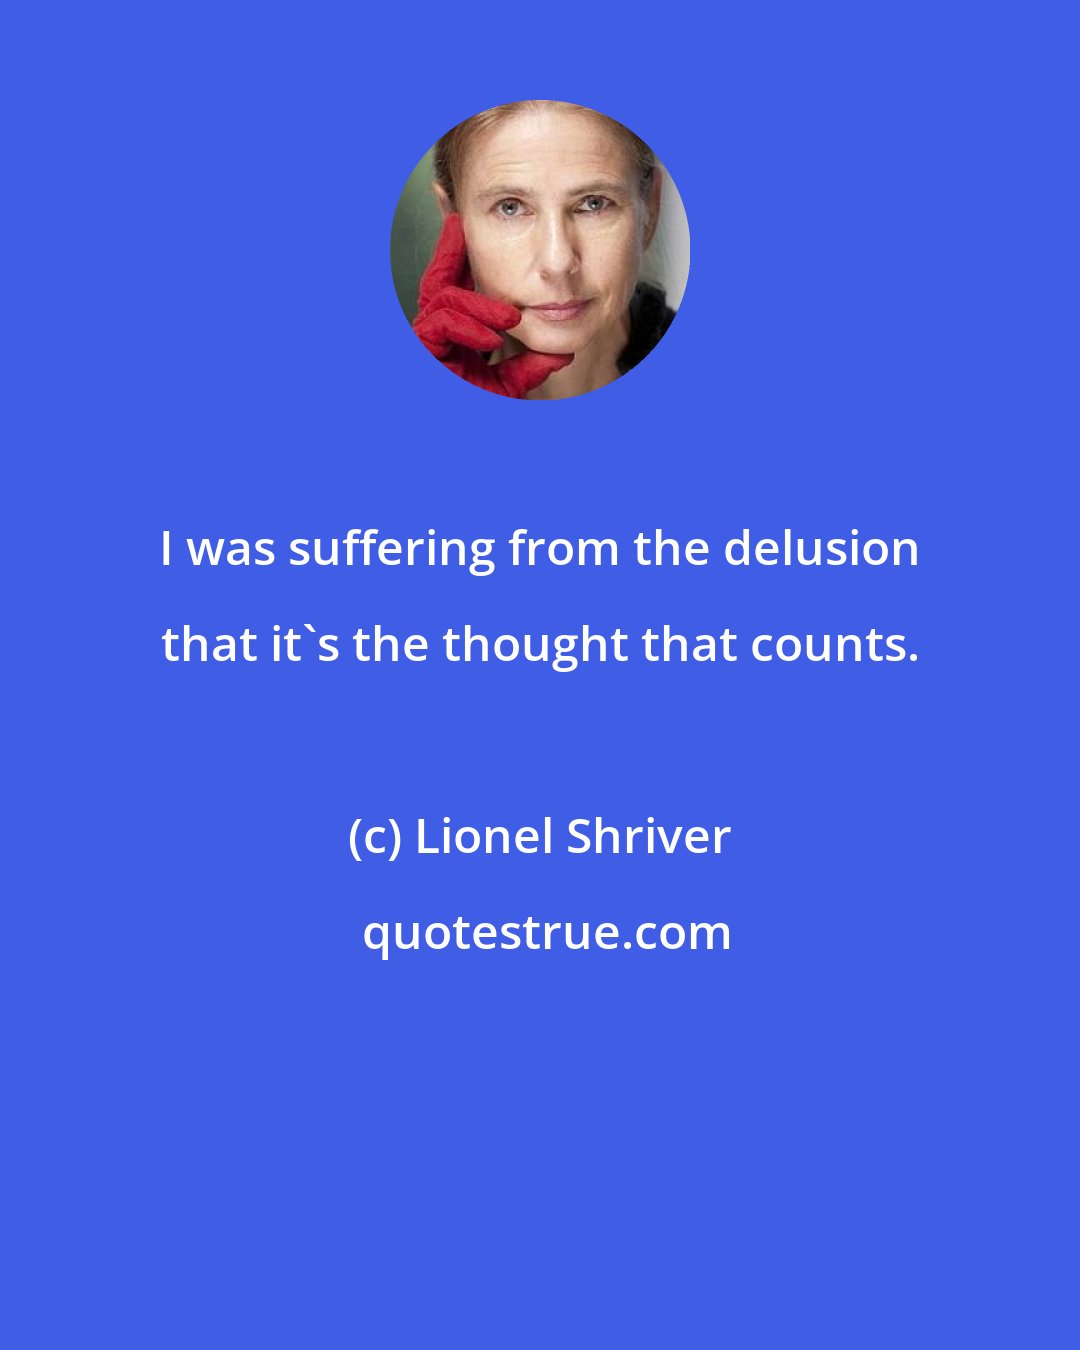 Lionel Shriver: I was suffering from the delusion that it's the thought that counts.